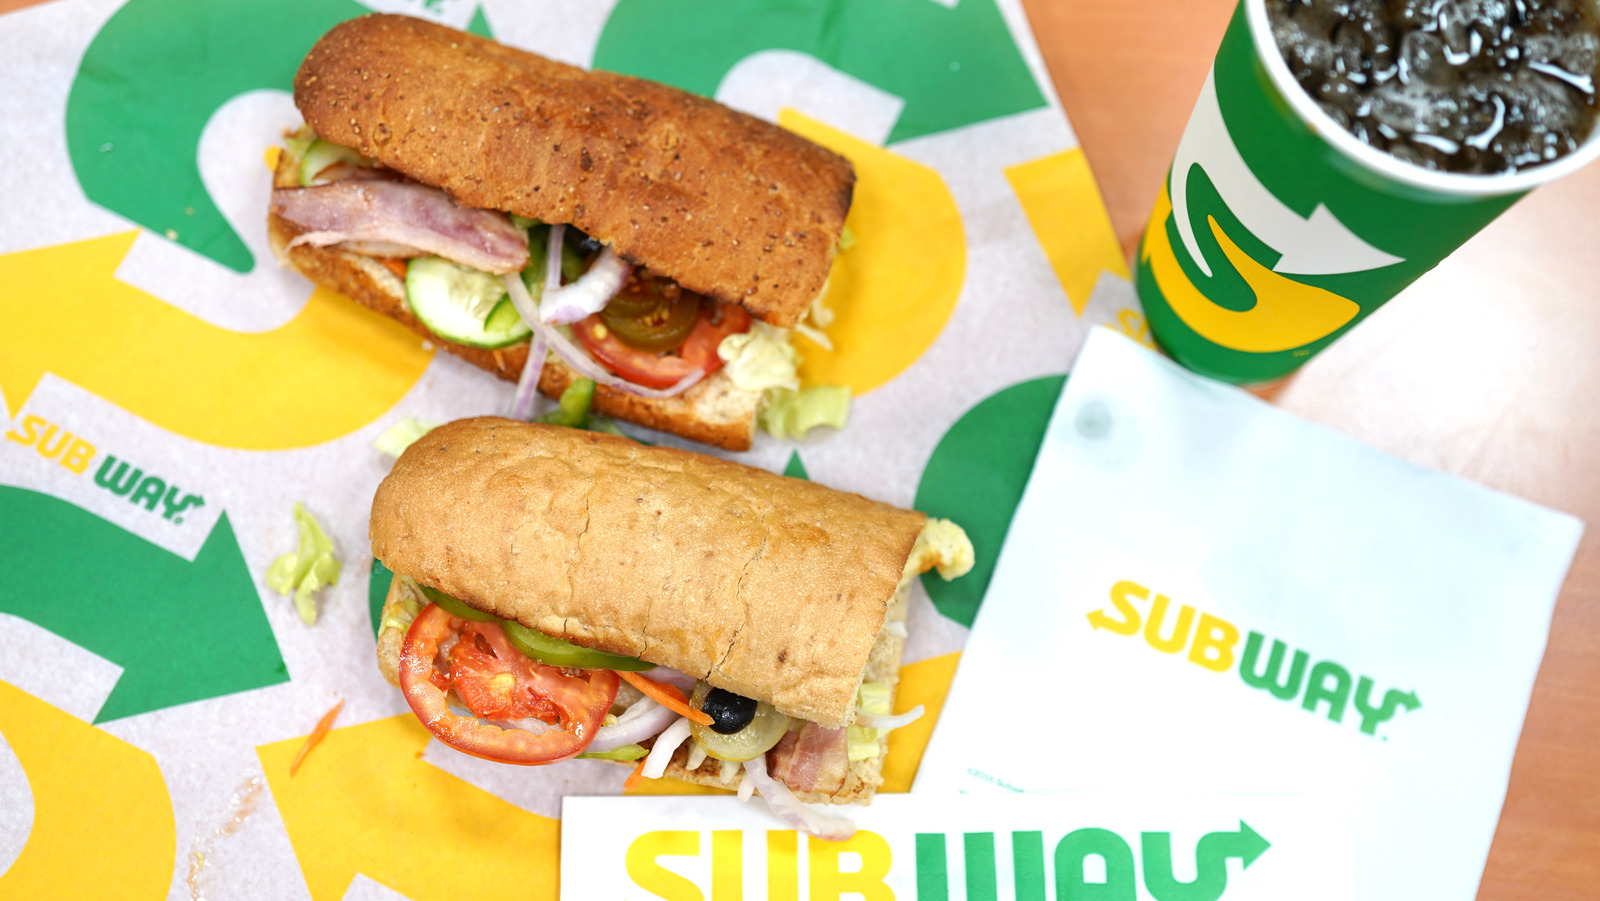 Subway Launches Protein Bowls That Are Just Footlongs Without Bread